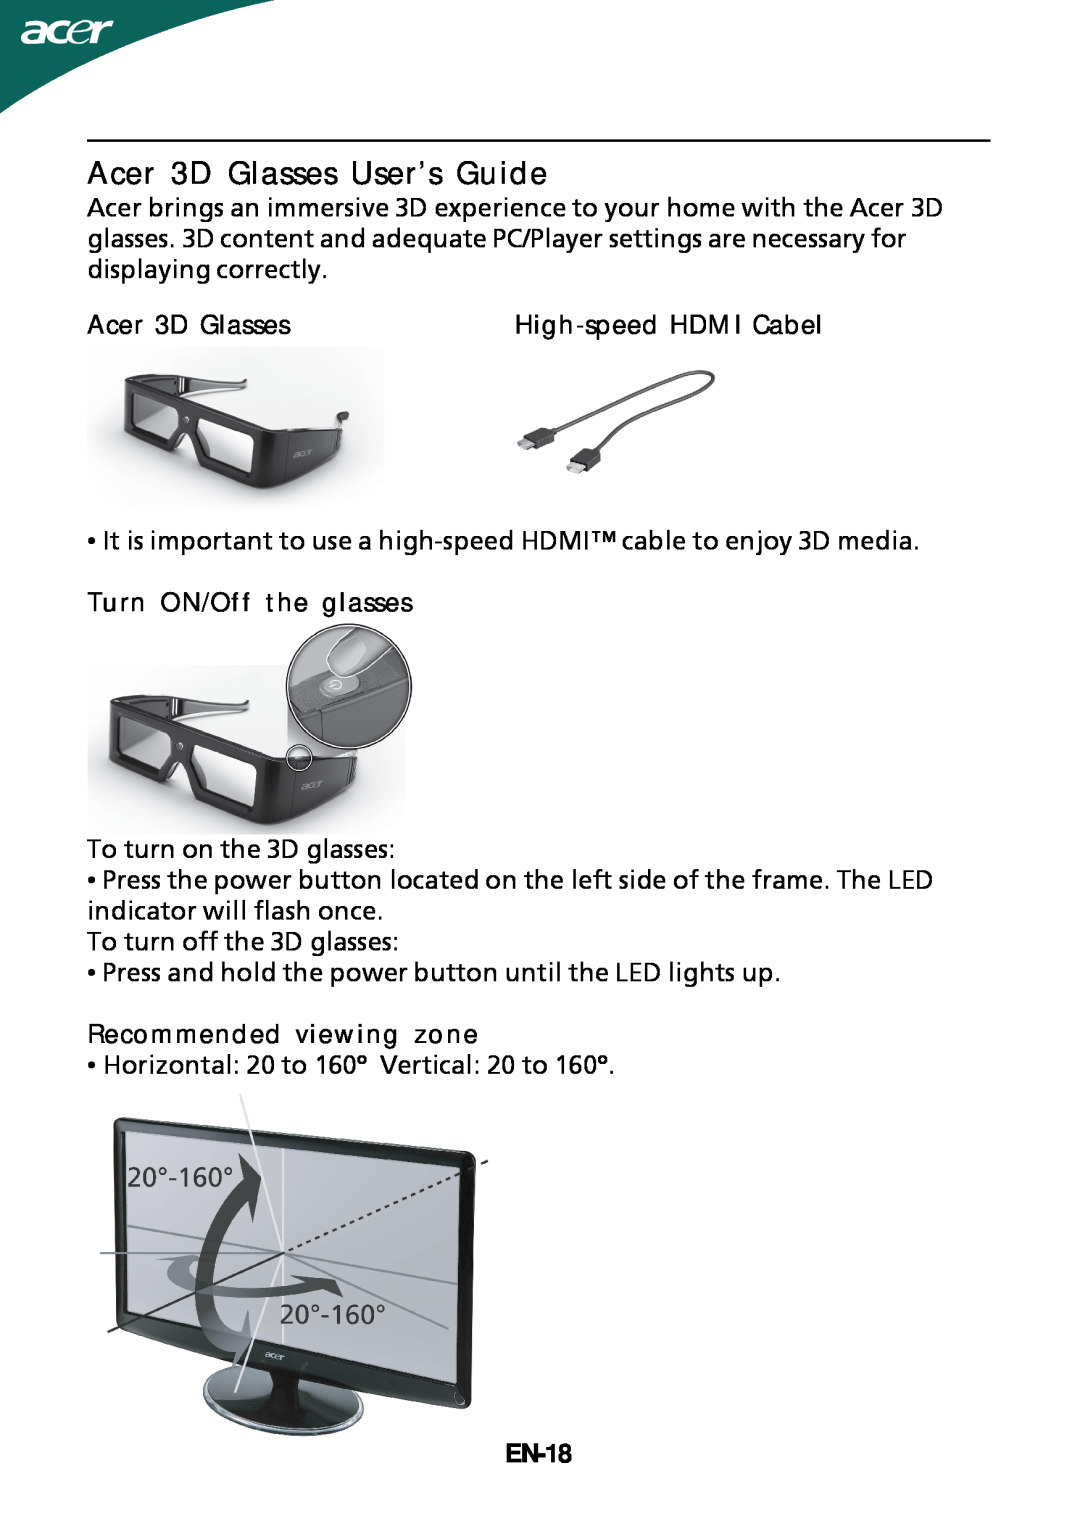 Acer HS244HQ Acer 3D Glasses User’s Guide, High-speed HDMI Cabel, Turn ON/Off the glasses, Recommended viewing zone, EN-18 